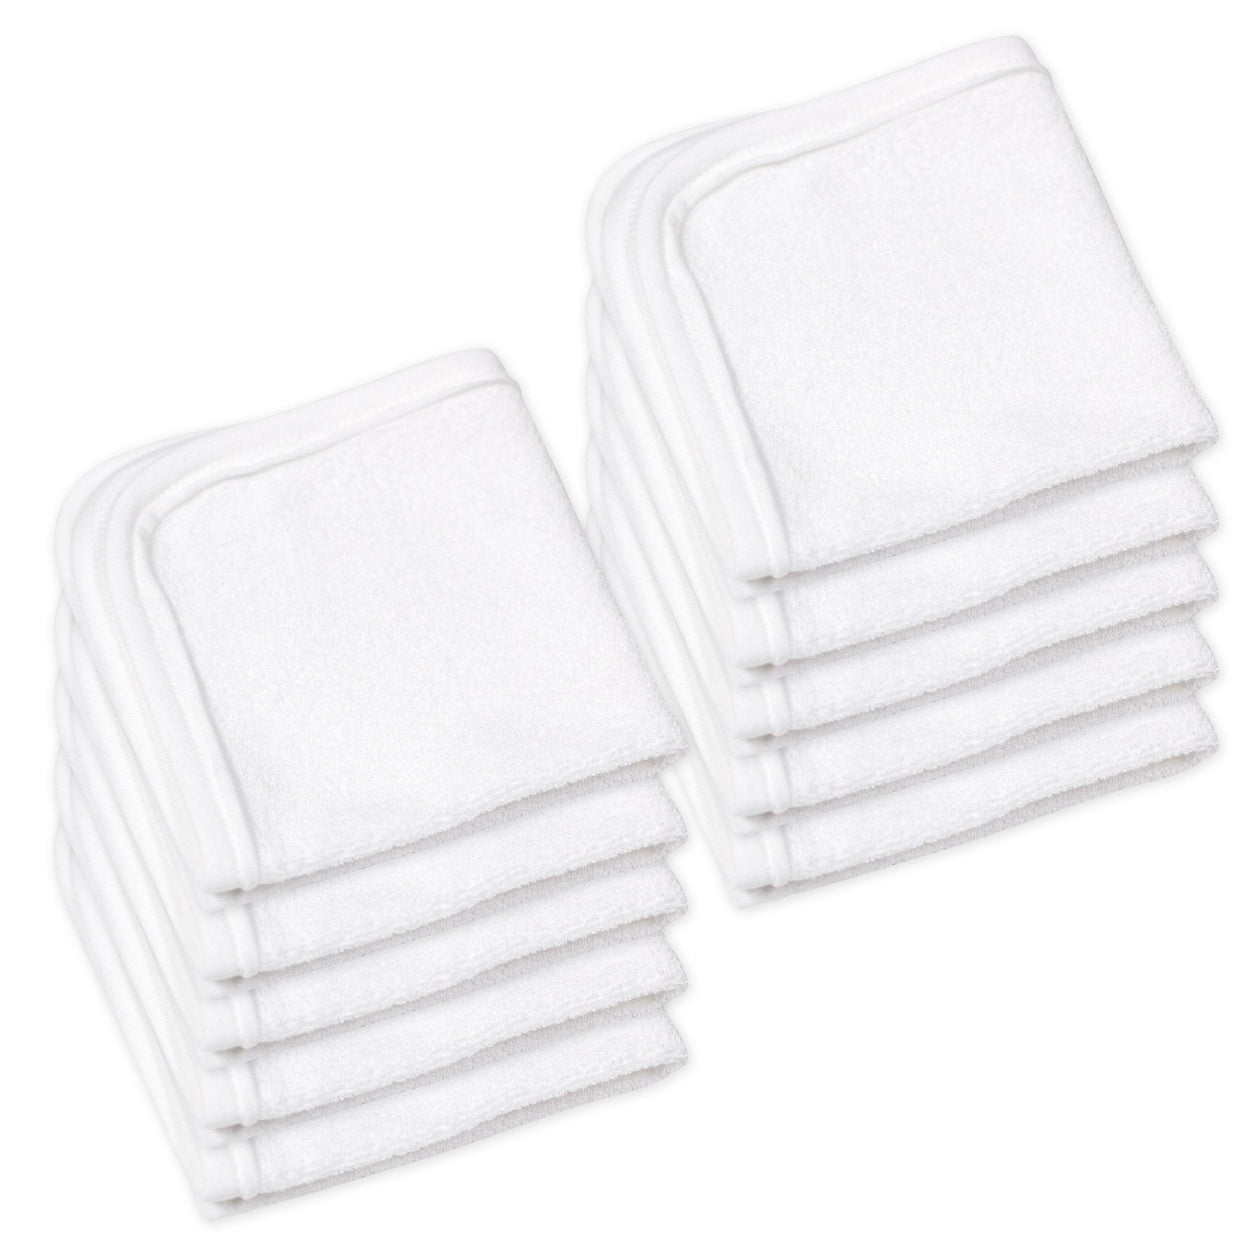 10-Pack Organic Cotton Baby-Terry Wash Cloths, Bright White